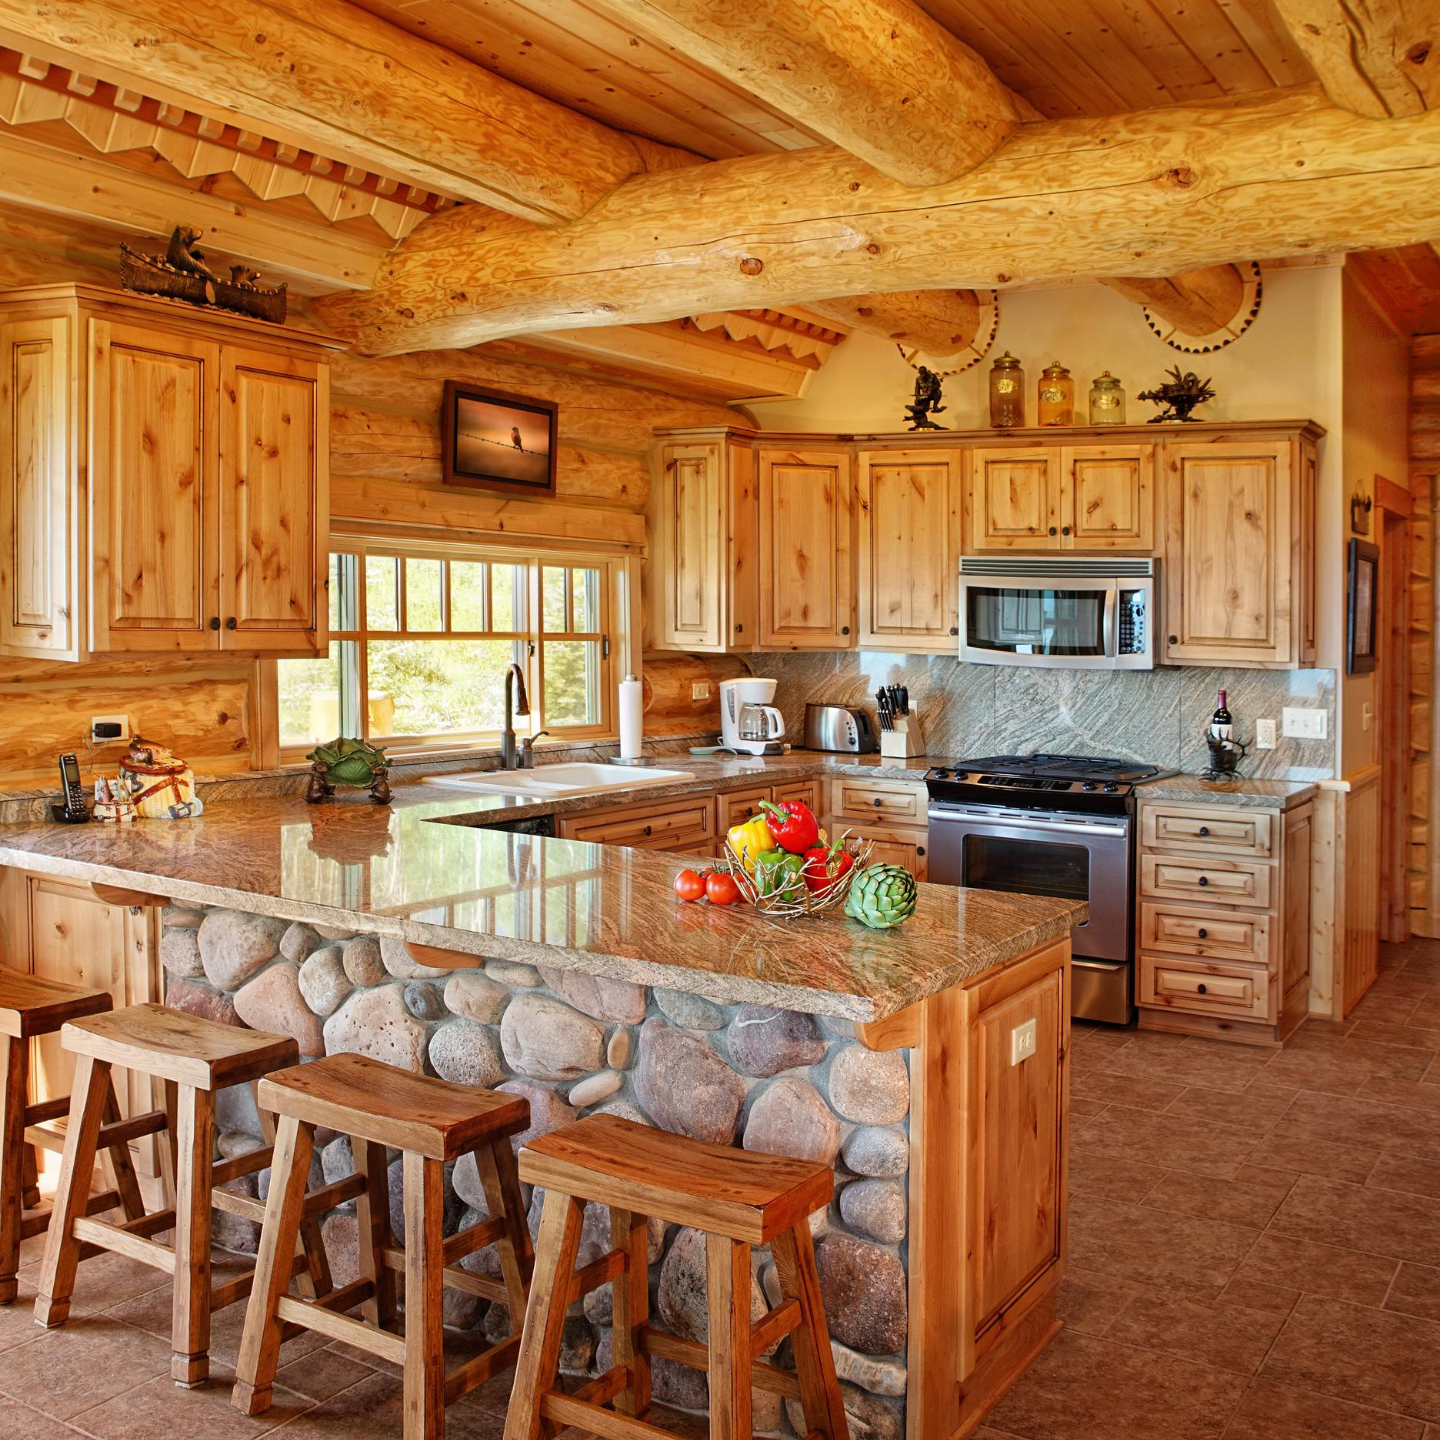  Log Home Decorating Ideas Pinterest for Streaming